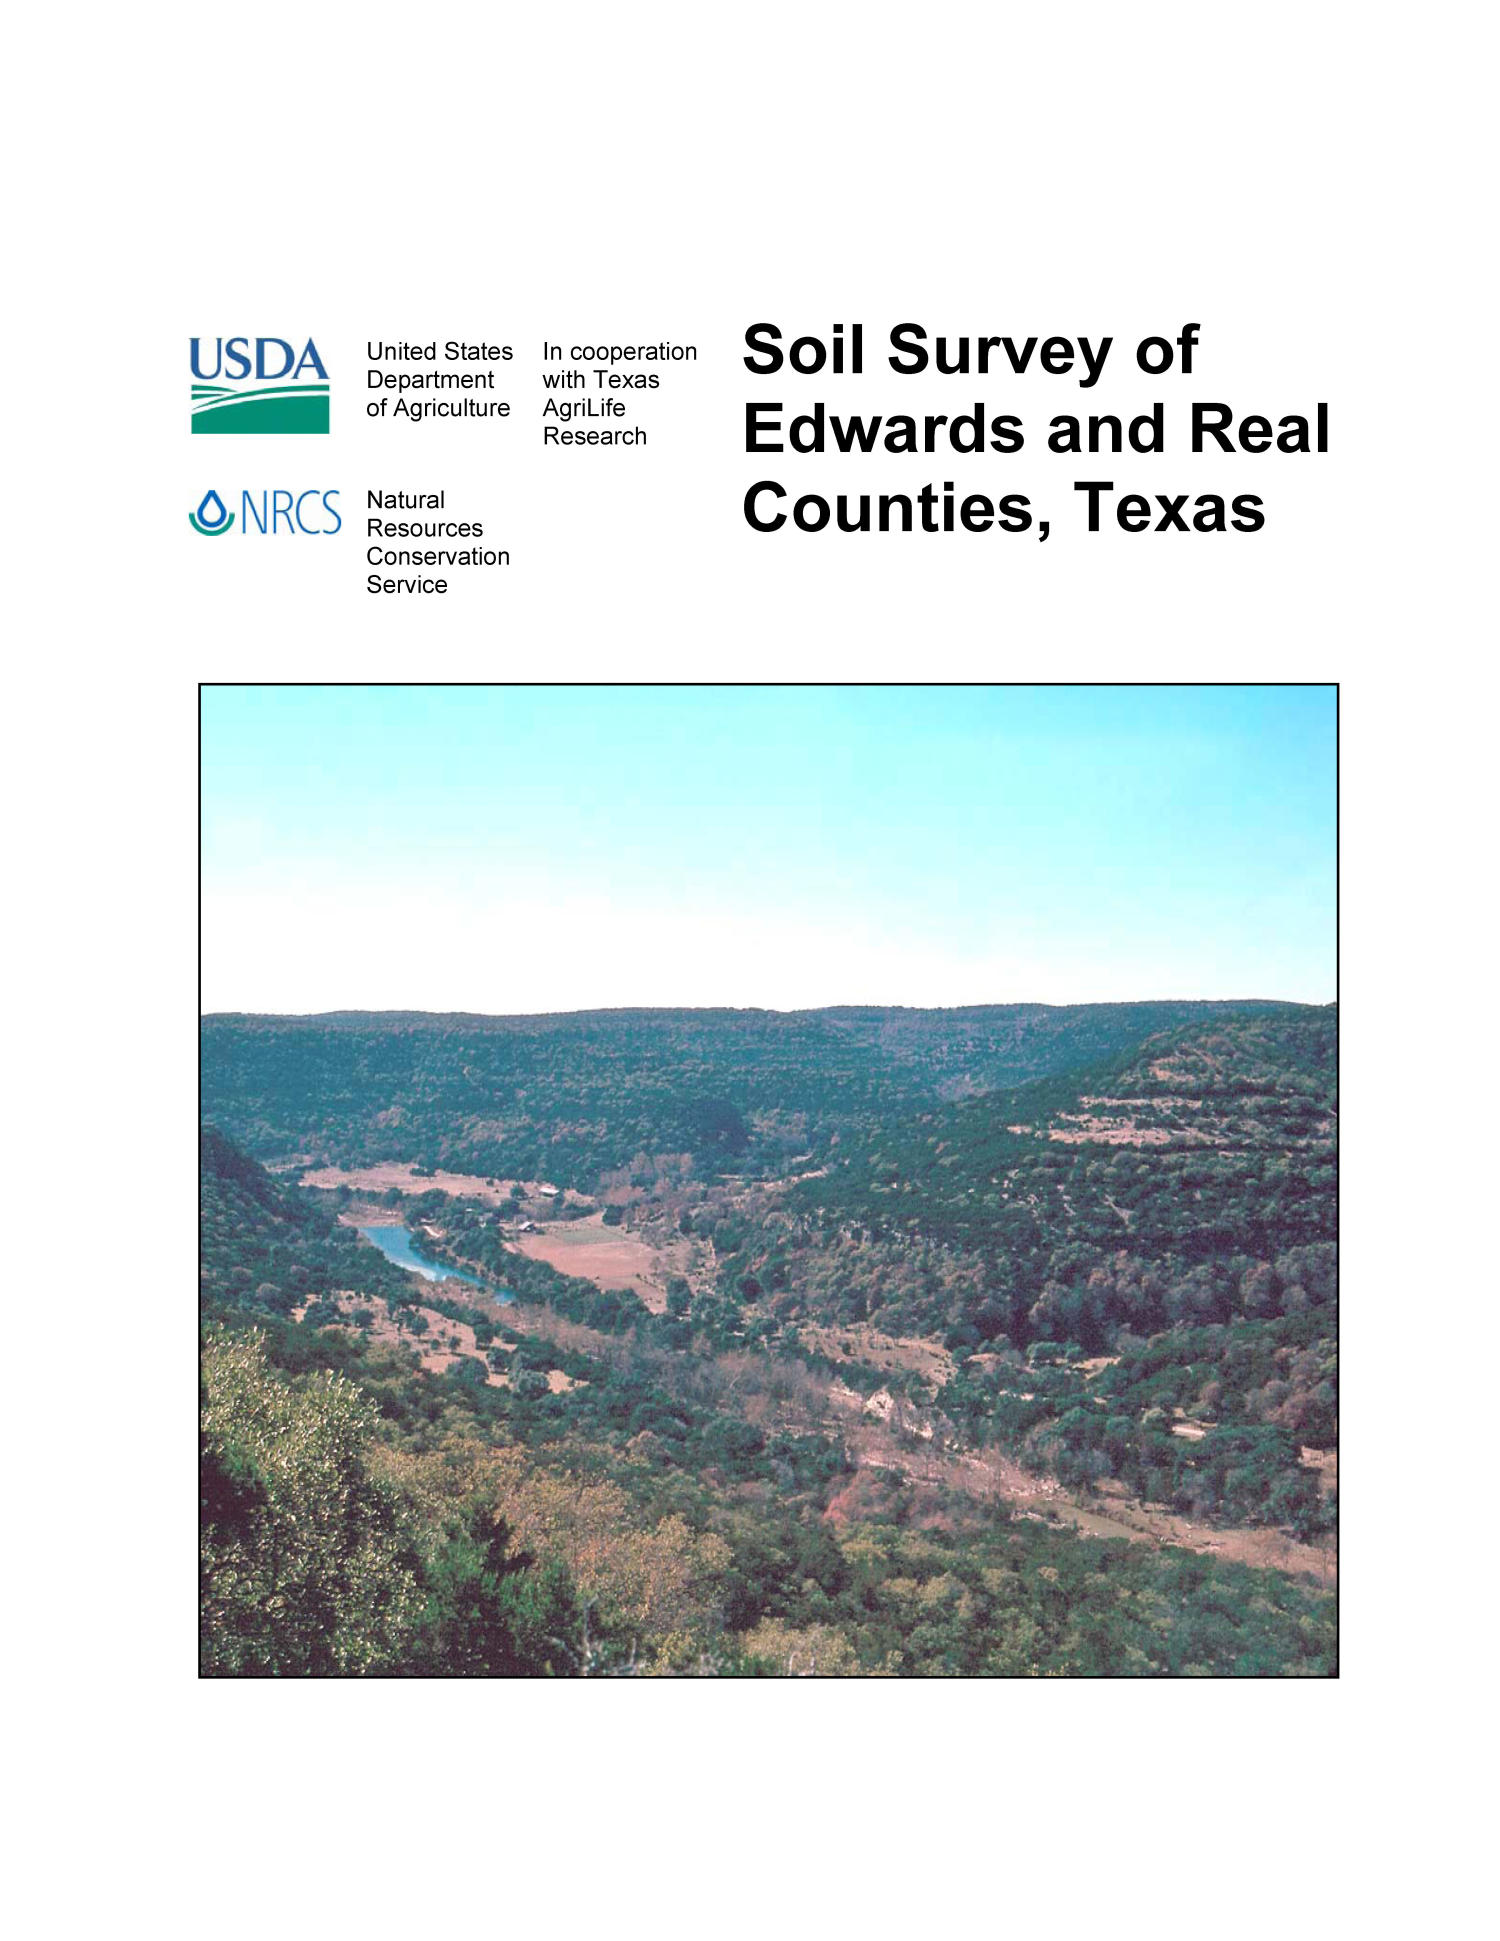 Soil Survey of Edwards and Real Counties, Texas
                                                
                                                    Front Cover
                                                